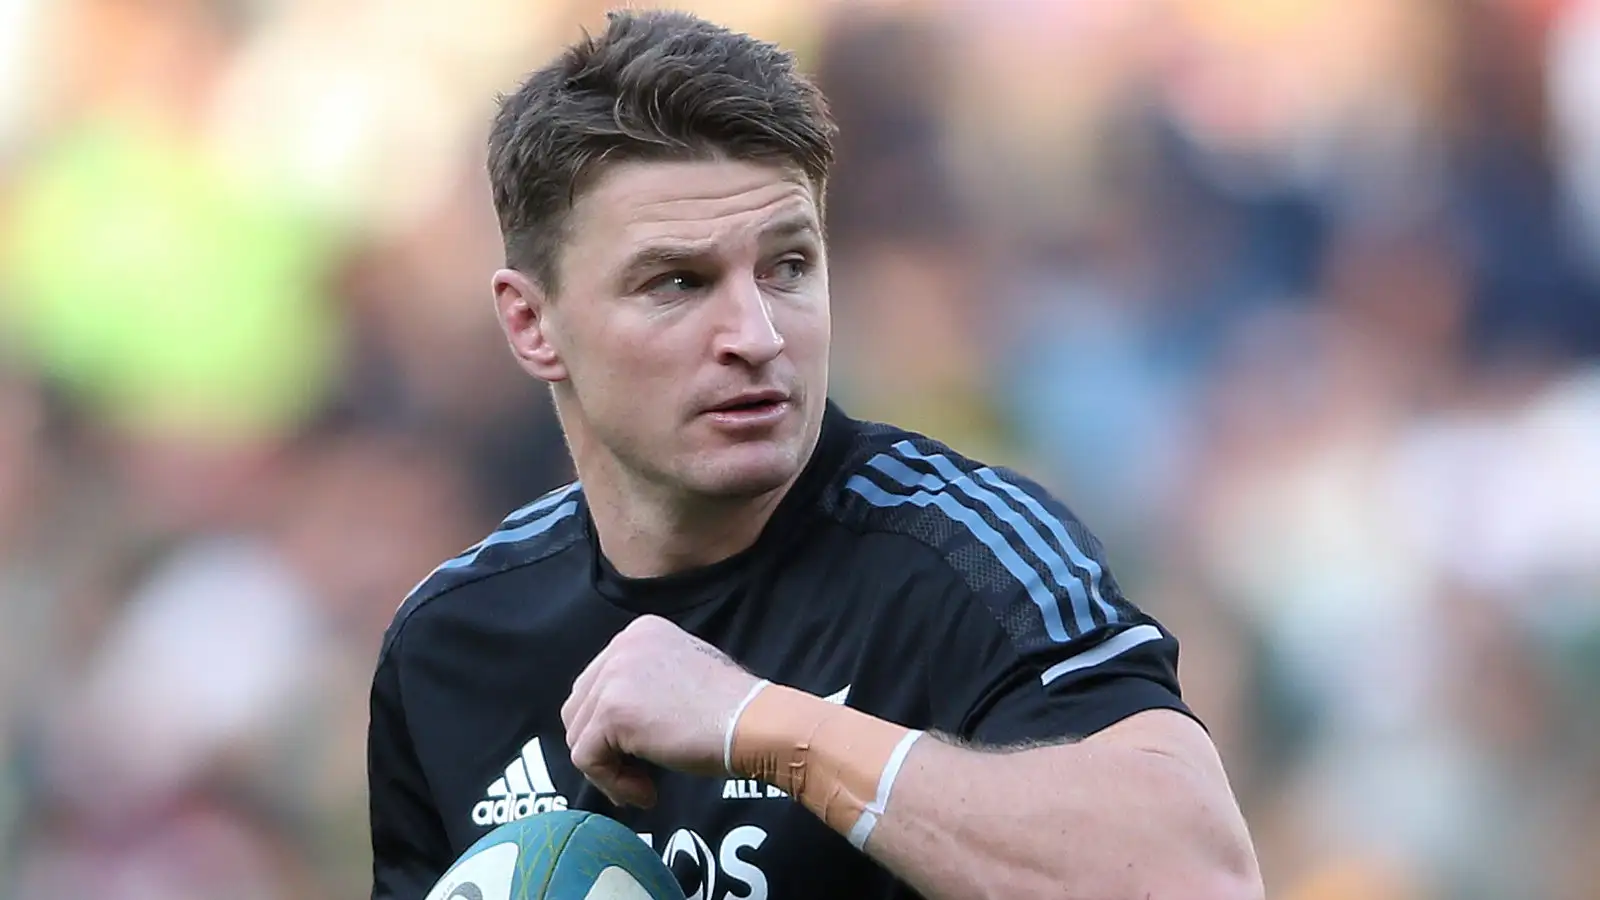 Beauden Barrett: All Blacks star offered contract exemption by New Zealand Rugby